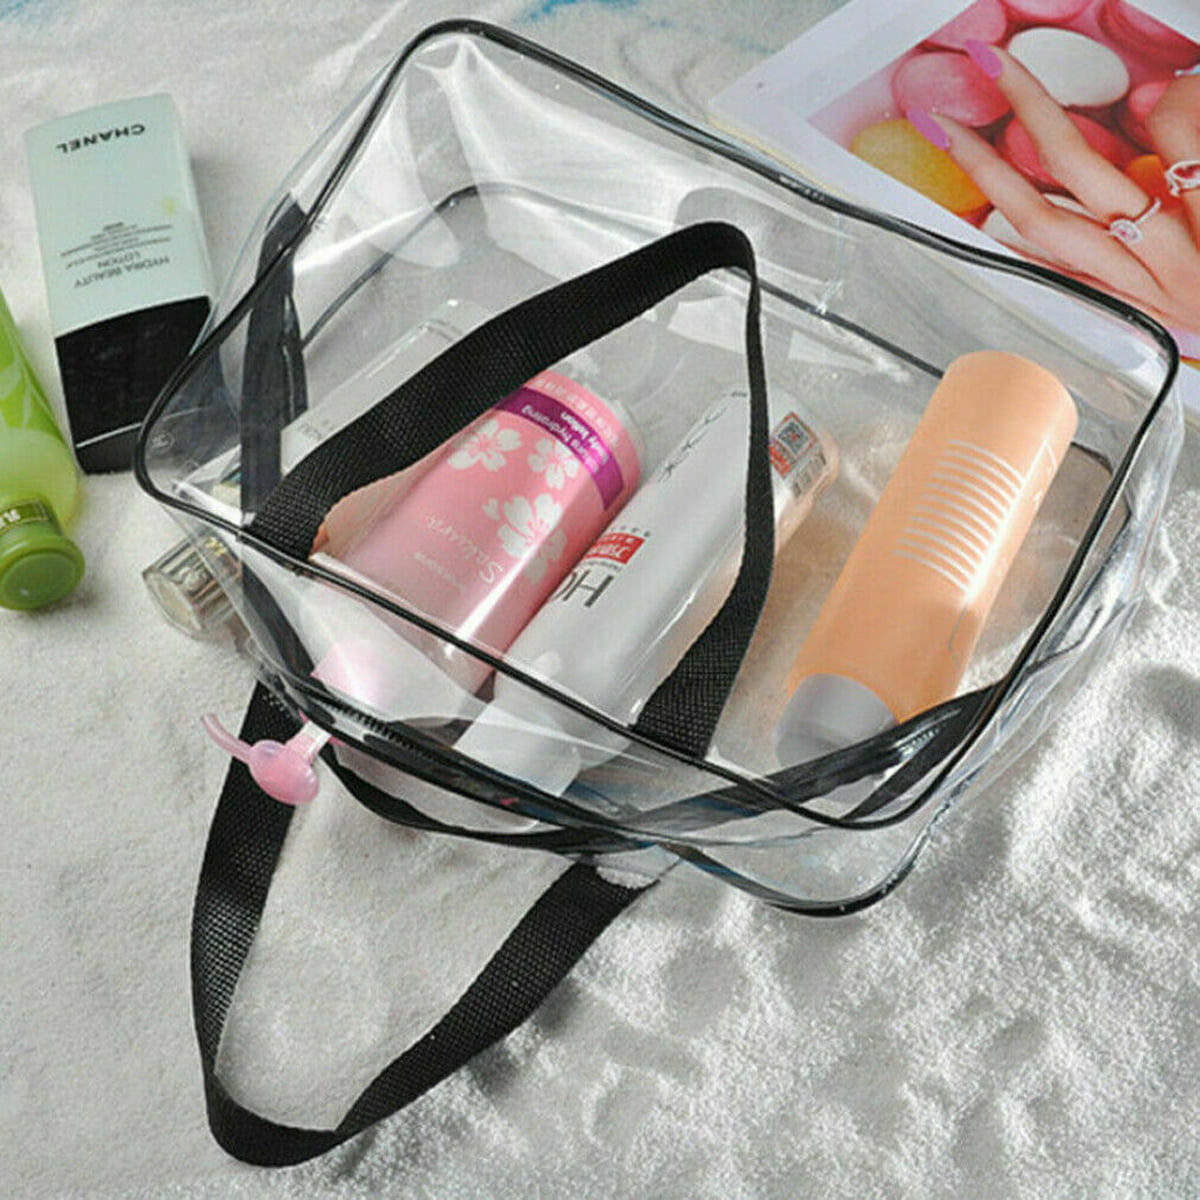 HOW TO ORGANIZE my cosmetic pouch - Chanel Beaute 